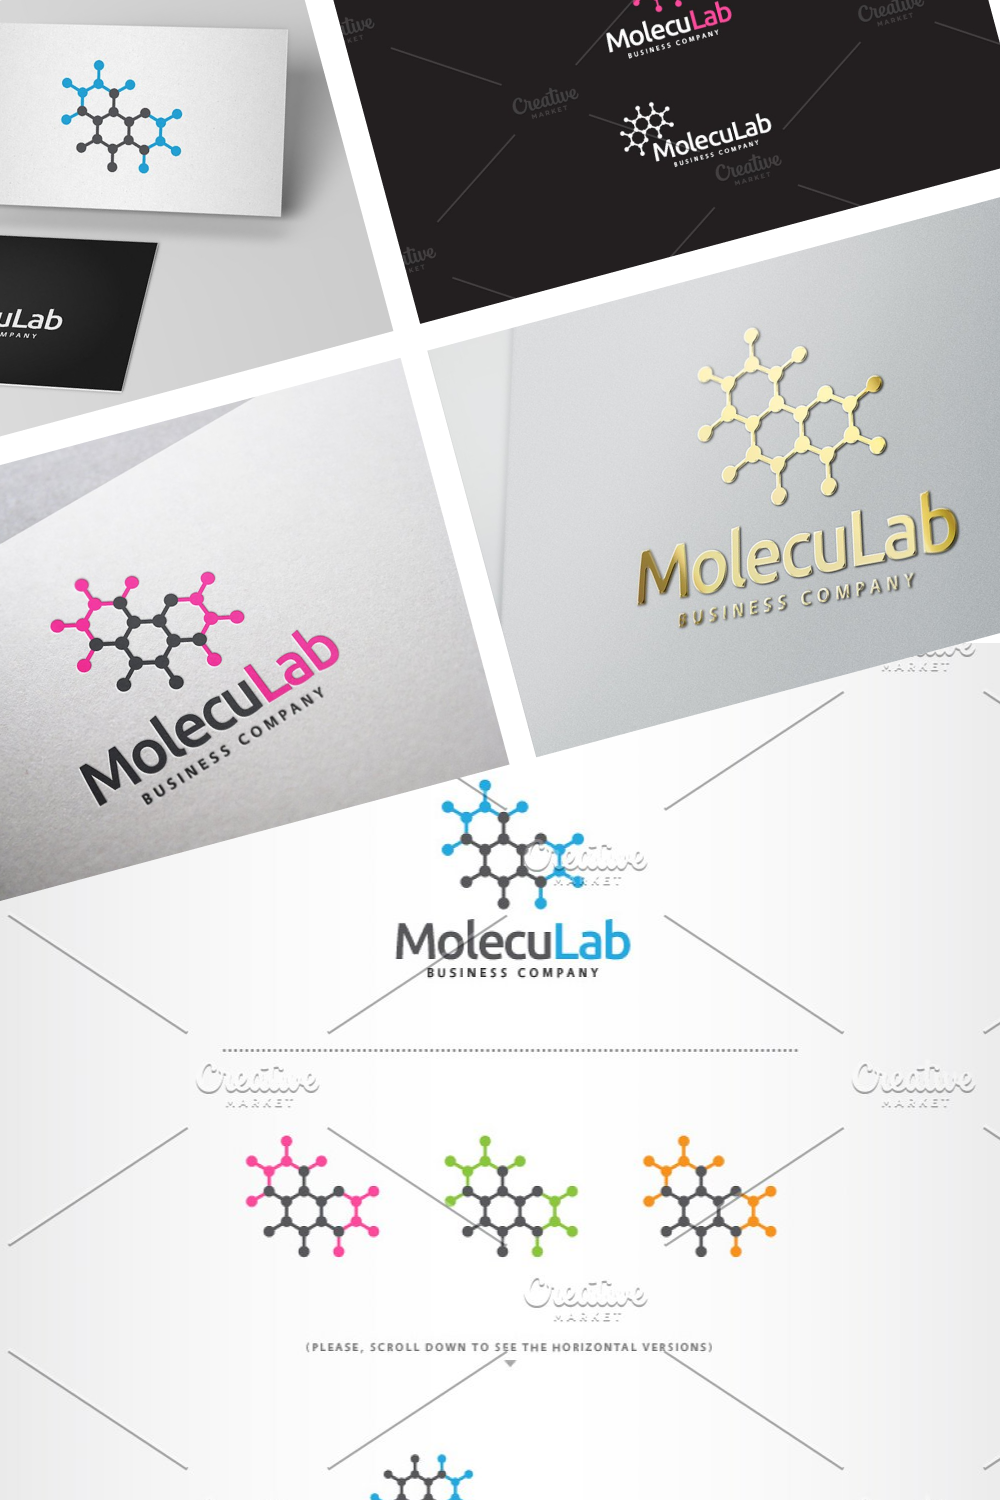 Logos for medical products.